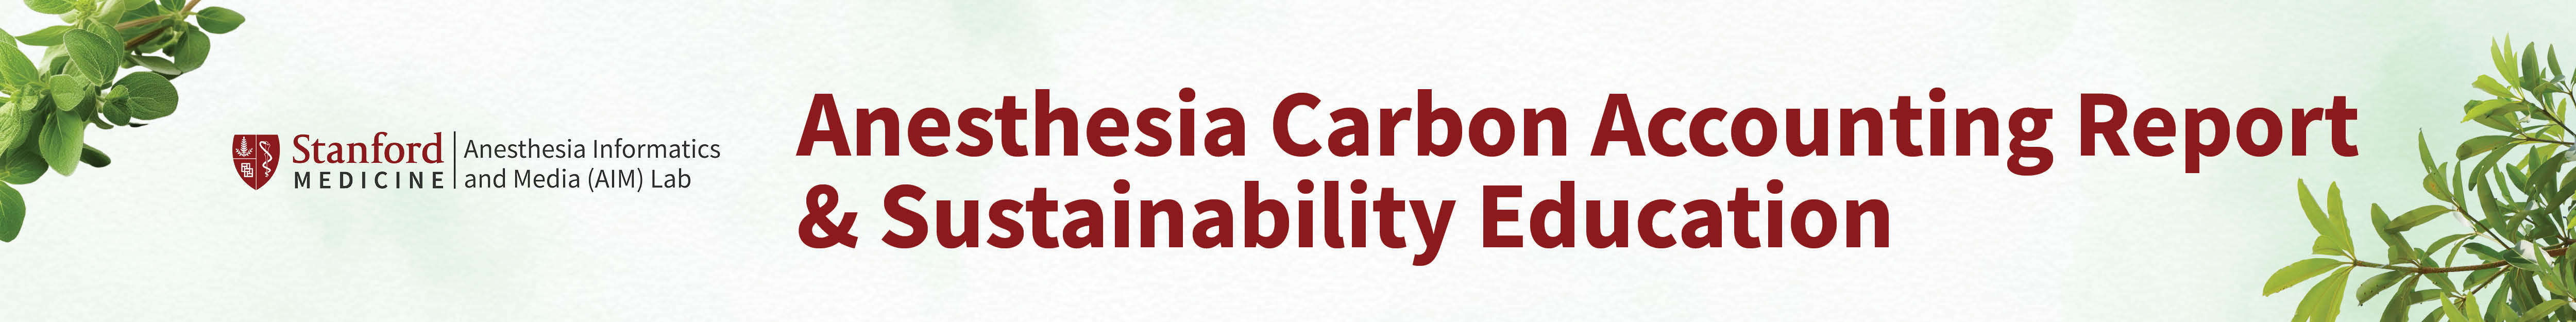 Anesthesia Carbon Accounting Report & Sustainability Education Banner